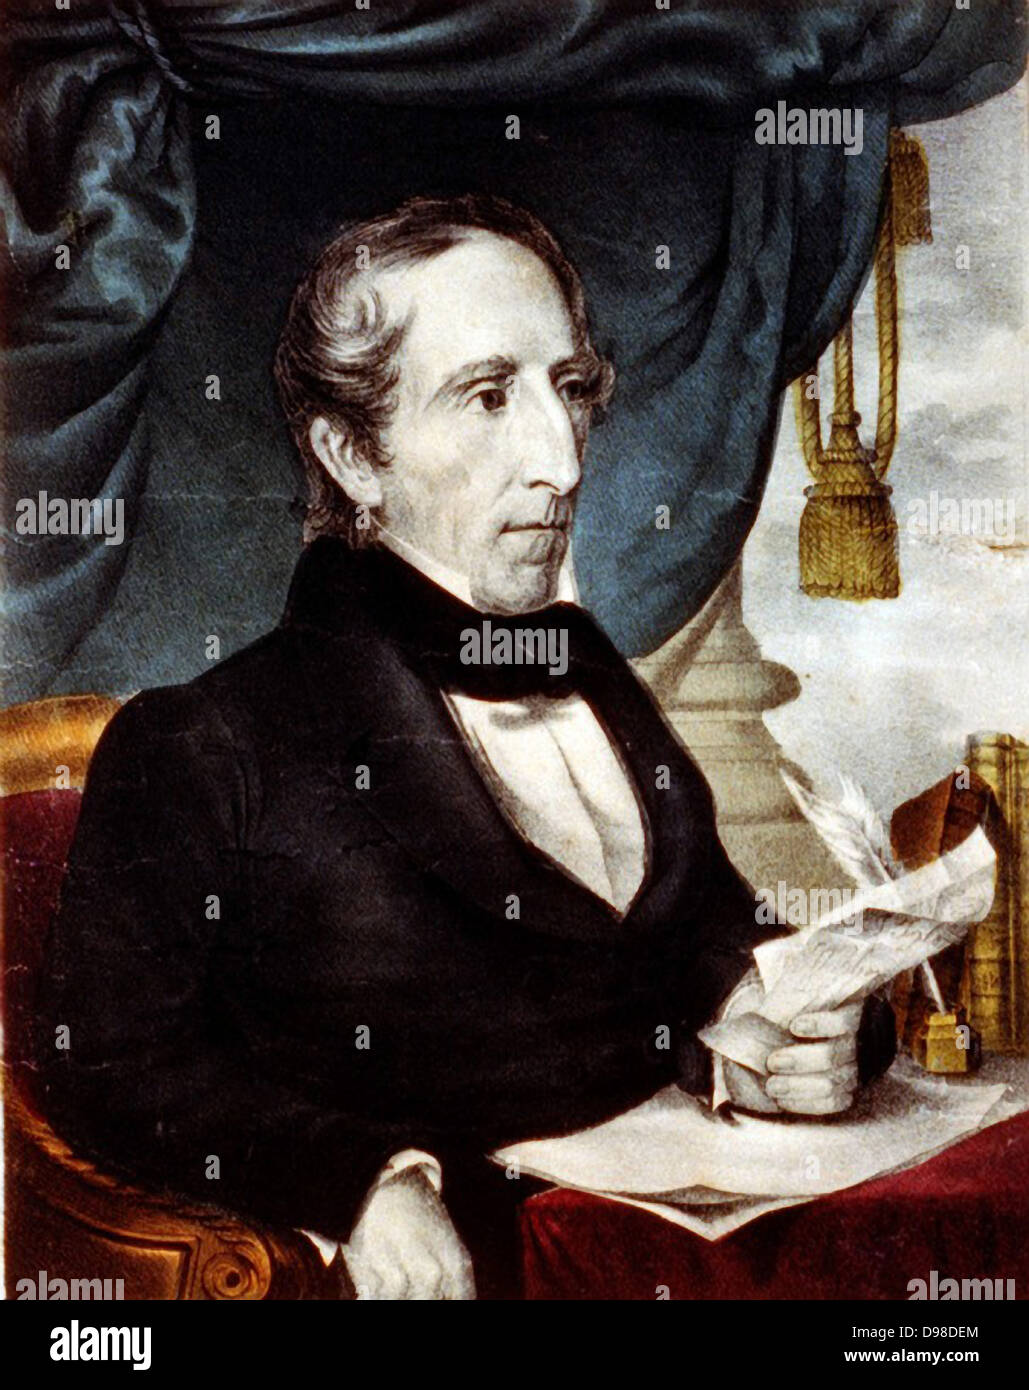 John Tyler (1790-1862) 10th President of the United States of America 1841-1845. The Annexation of Mexico took place during his administration. Currier & Ives lithograph portrait of Tyler seated at desk. Stock Photo